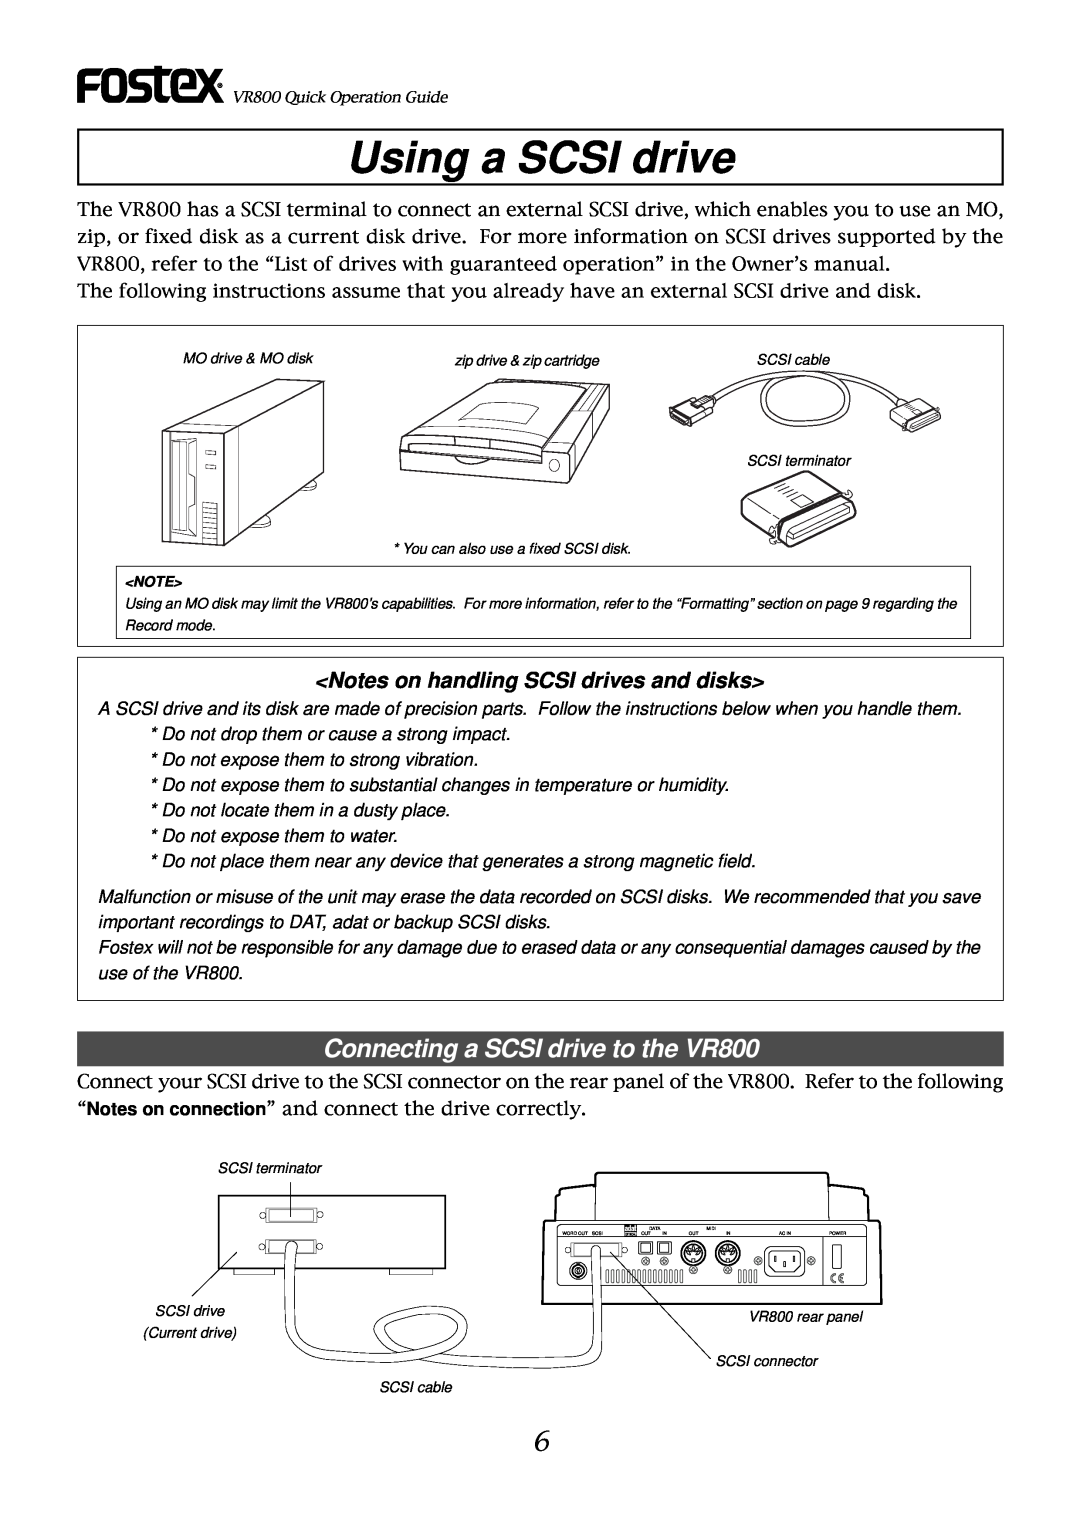 Fostex owner manual Using a SCSI drive, Connecting a SCSI drive to the VR800, Notes on handling SCSI drives and disks 